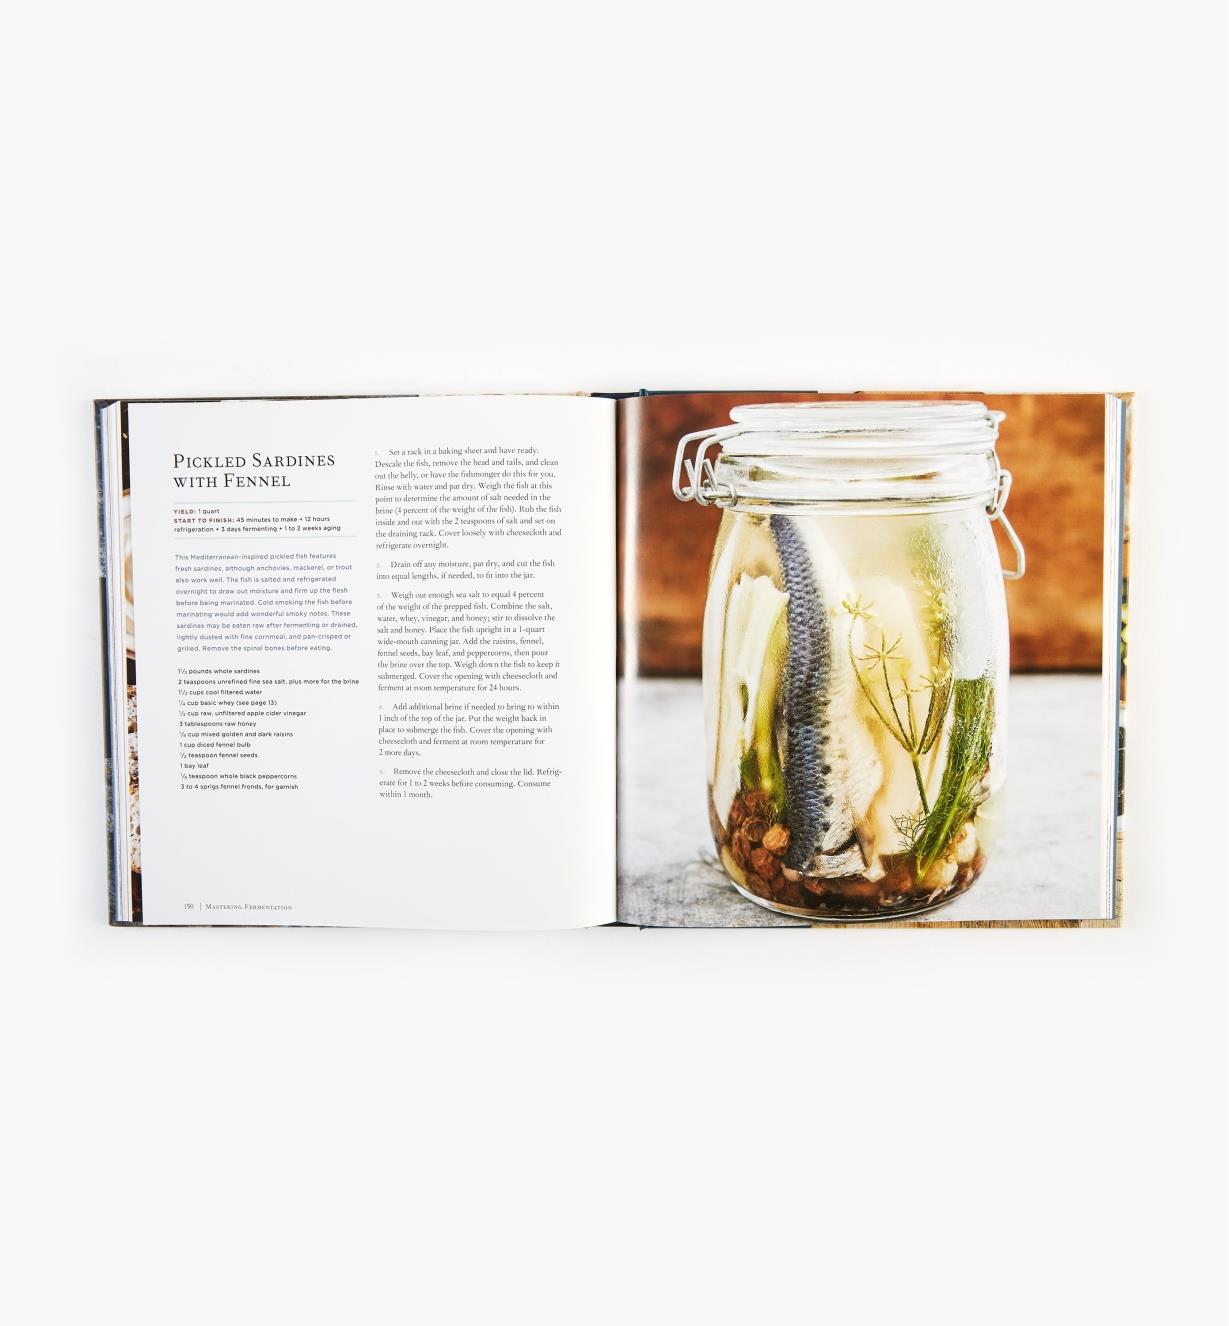 Open book showing recipe for basic fish curing